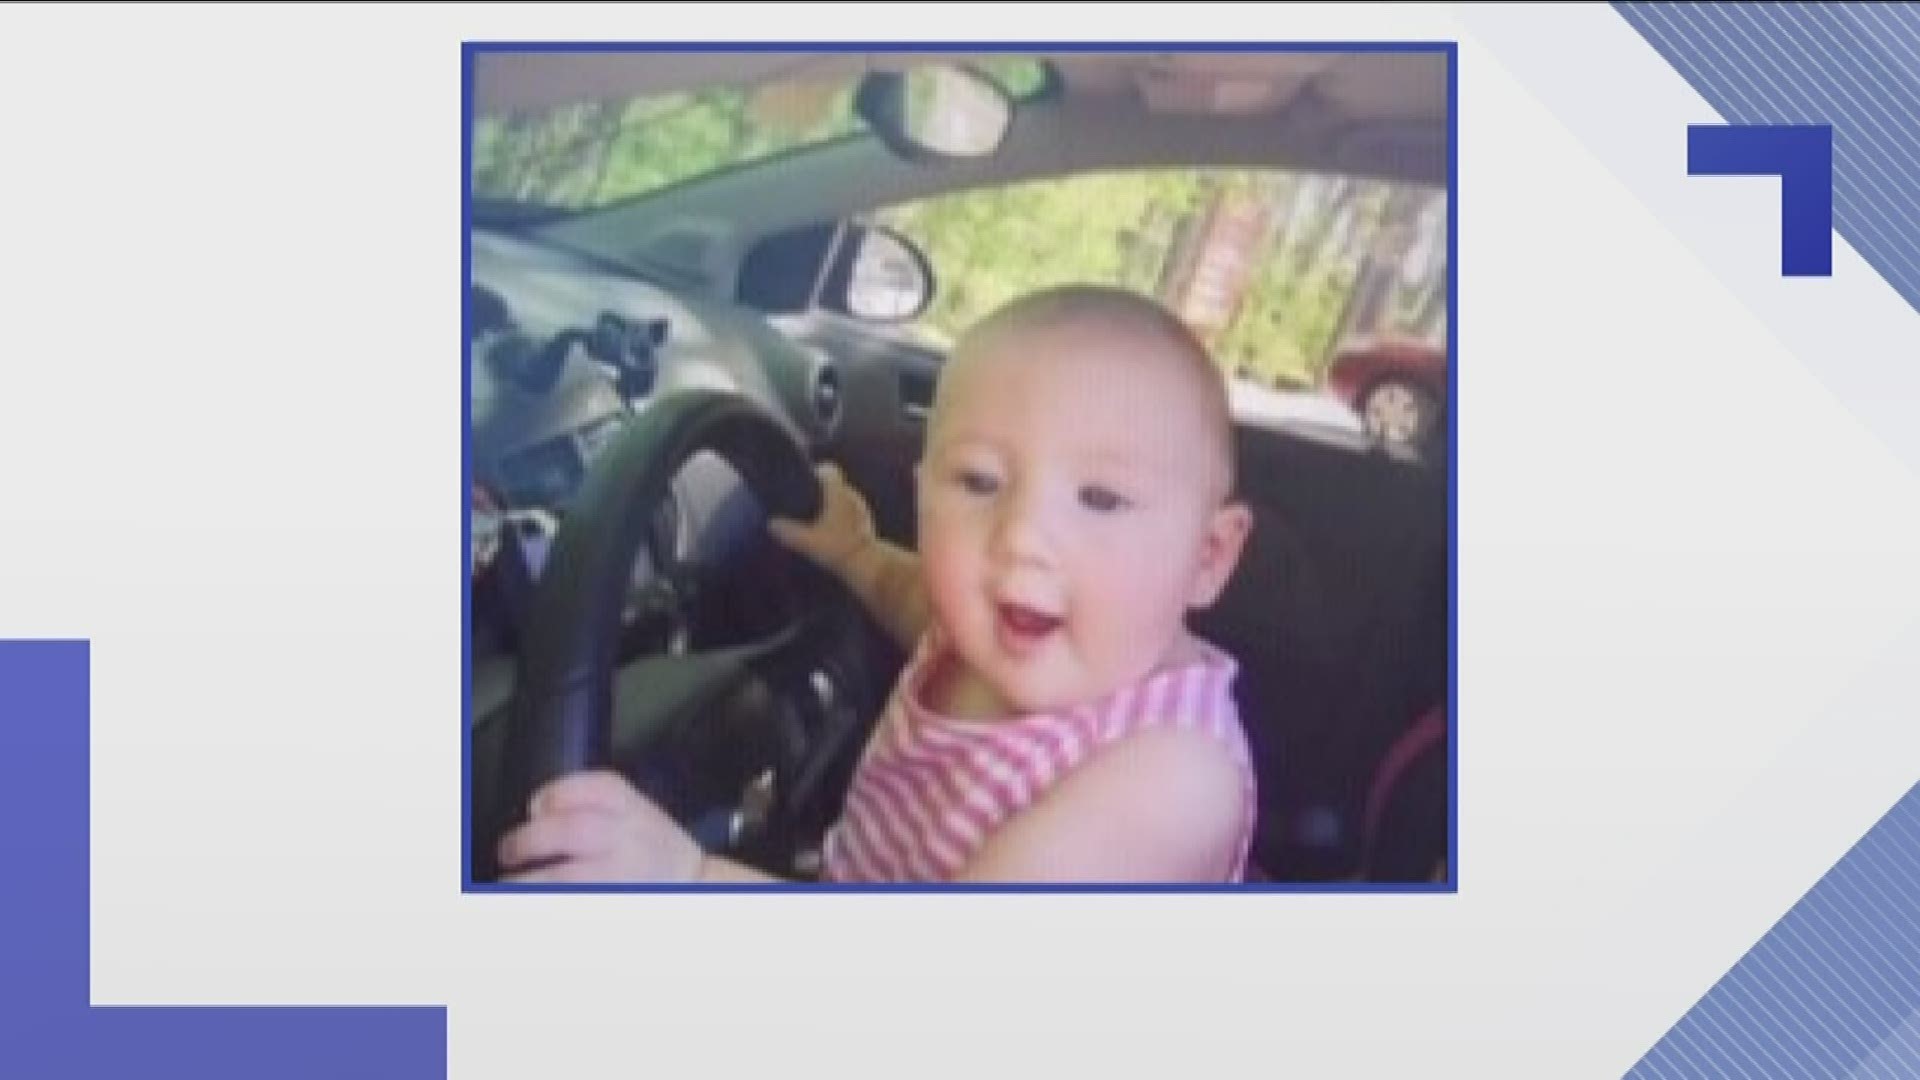 According to authorities, 7-month-old Sarah Jay Grossman was last seen around 6:30 p.m.